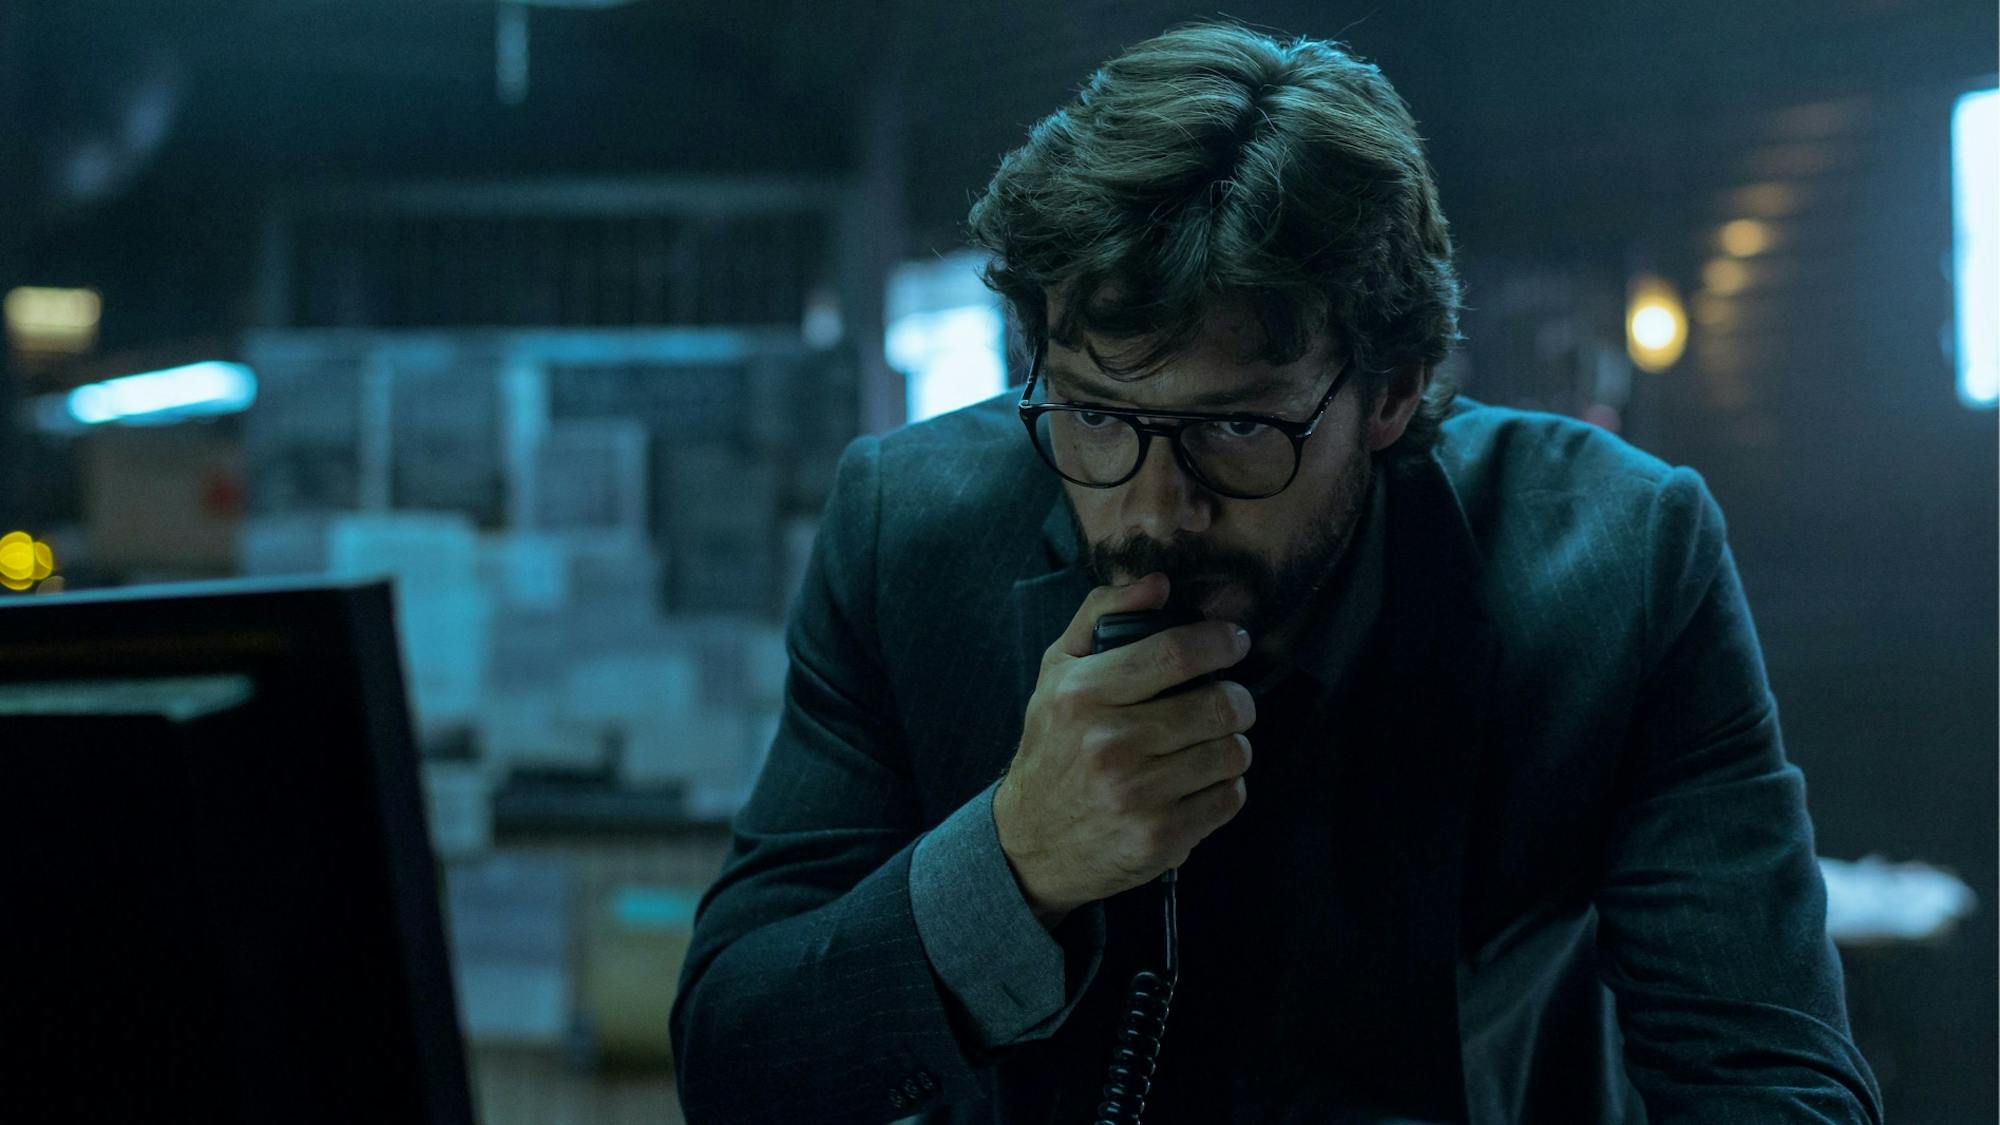 El Professor (Álvaro Morte) wears a dark suit and glasses and speaks into a radio. The mood in the room is ominous and grey.